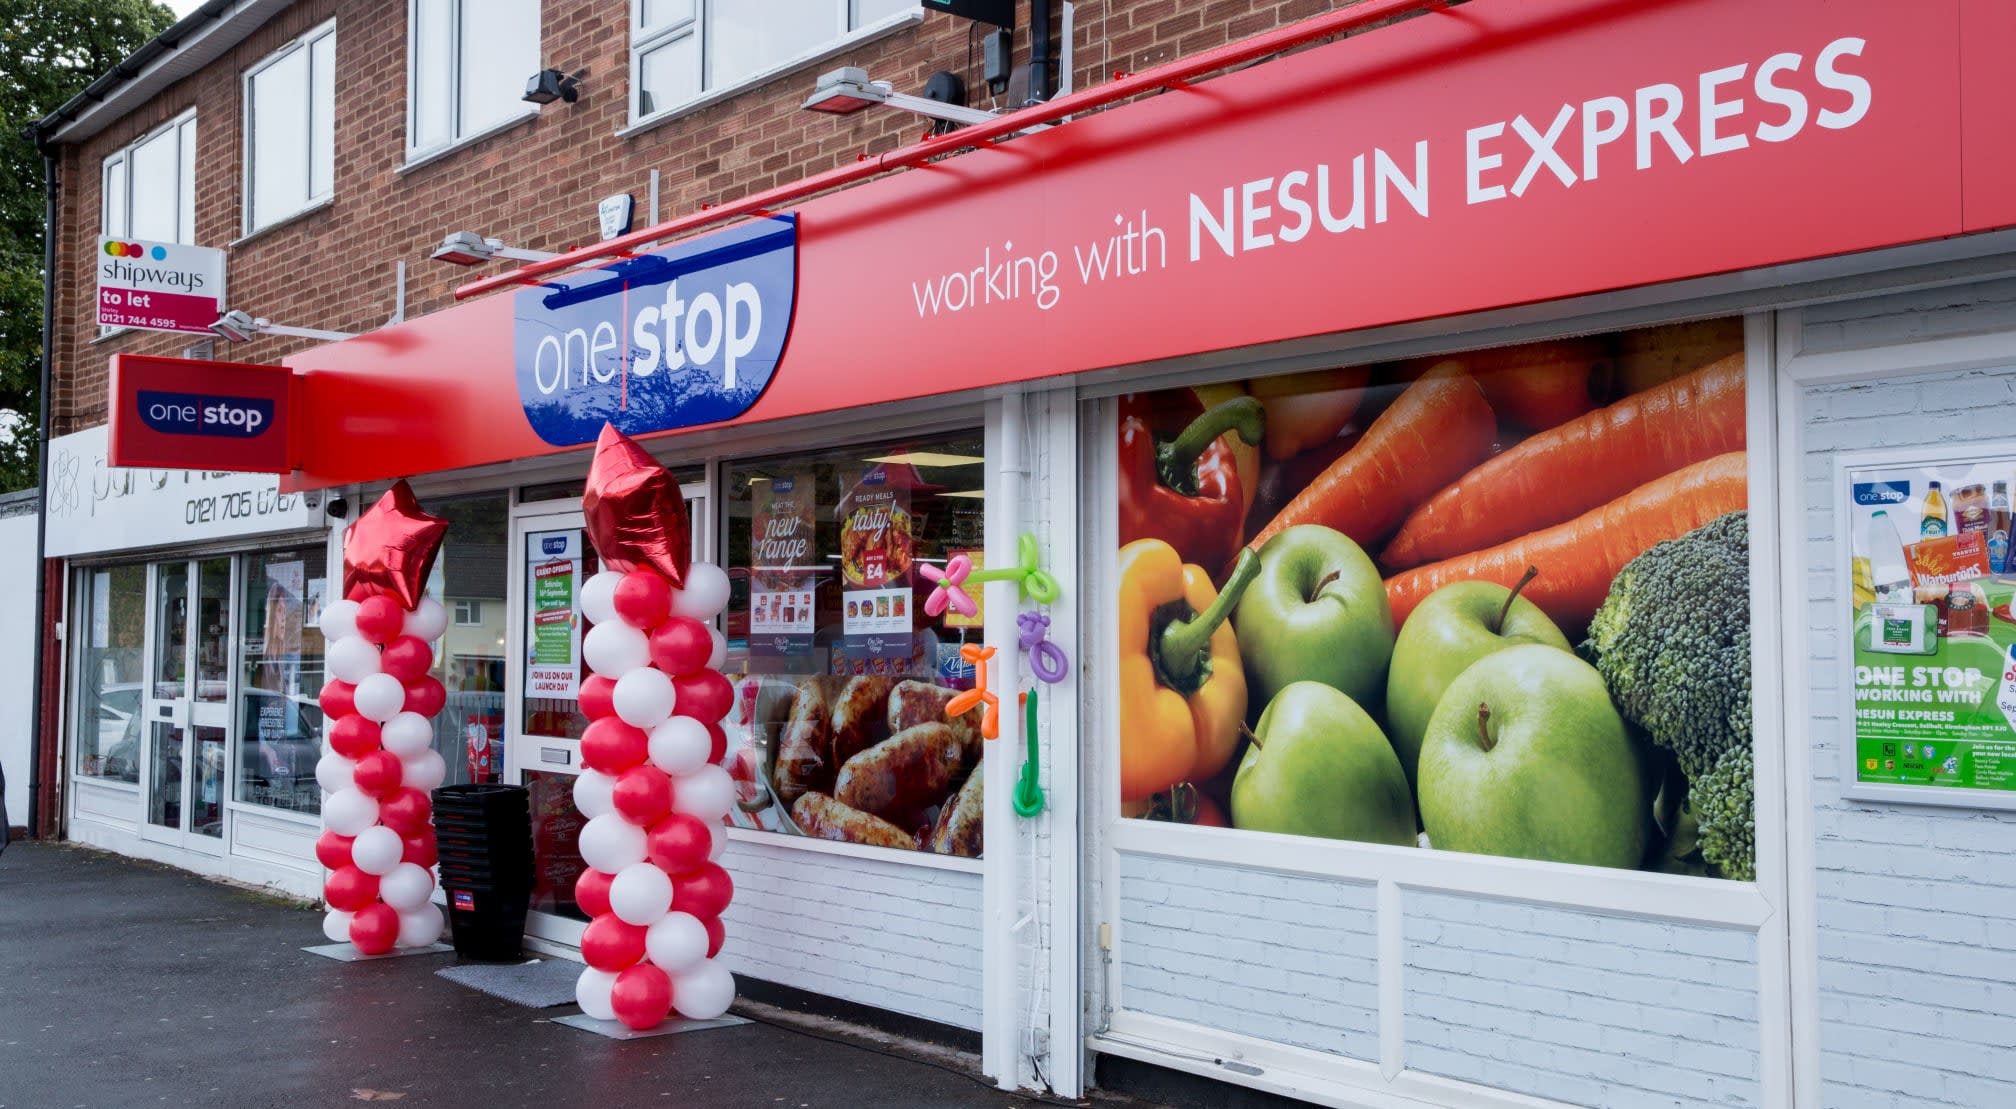 Images One Stop NESUN EXPRESS Solihull